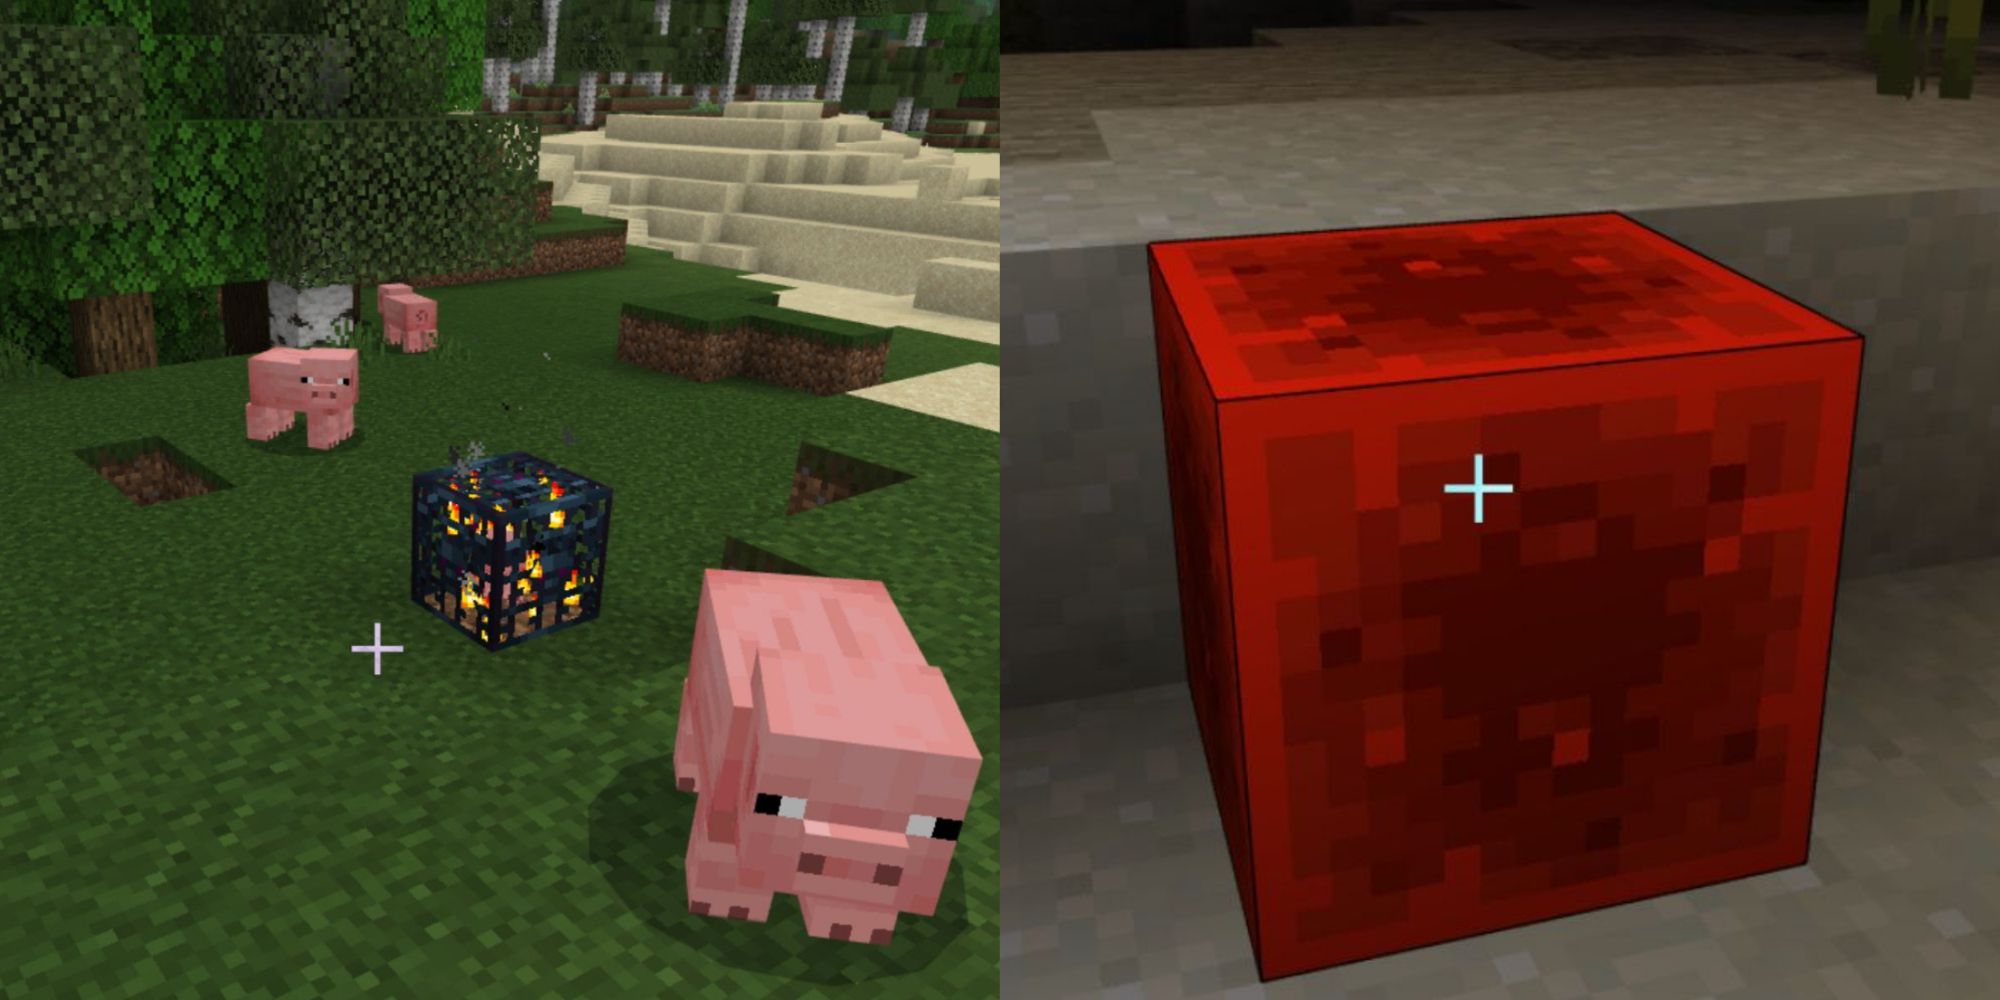 Minecraft Items In Real Life Featured Split Image Pig Spawner and Redstone Block